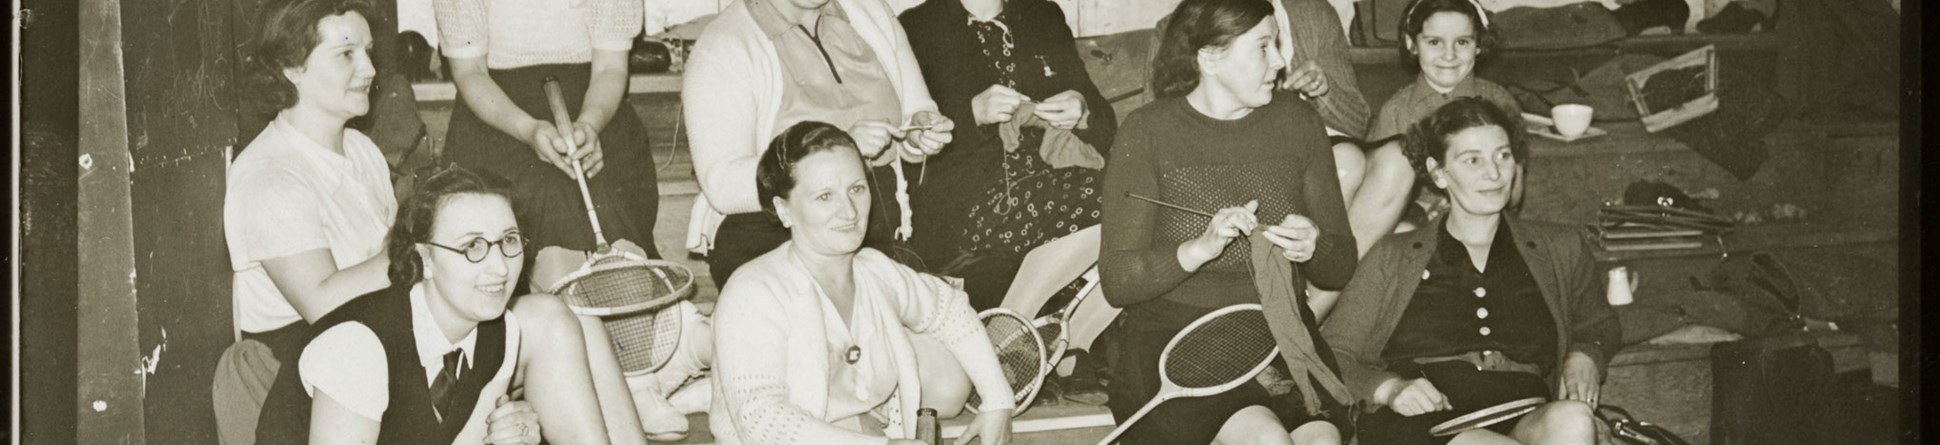 Women sitting on tiered benches holding badminton racquets and knitting.